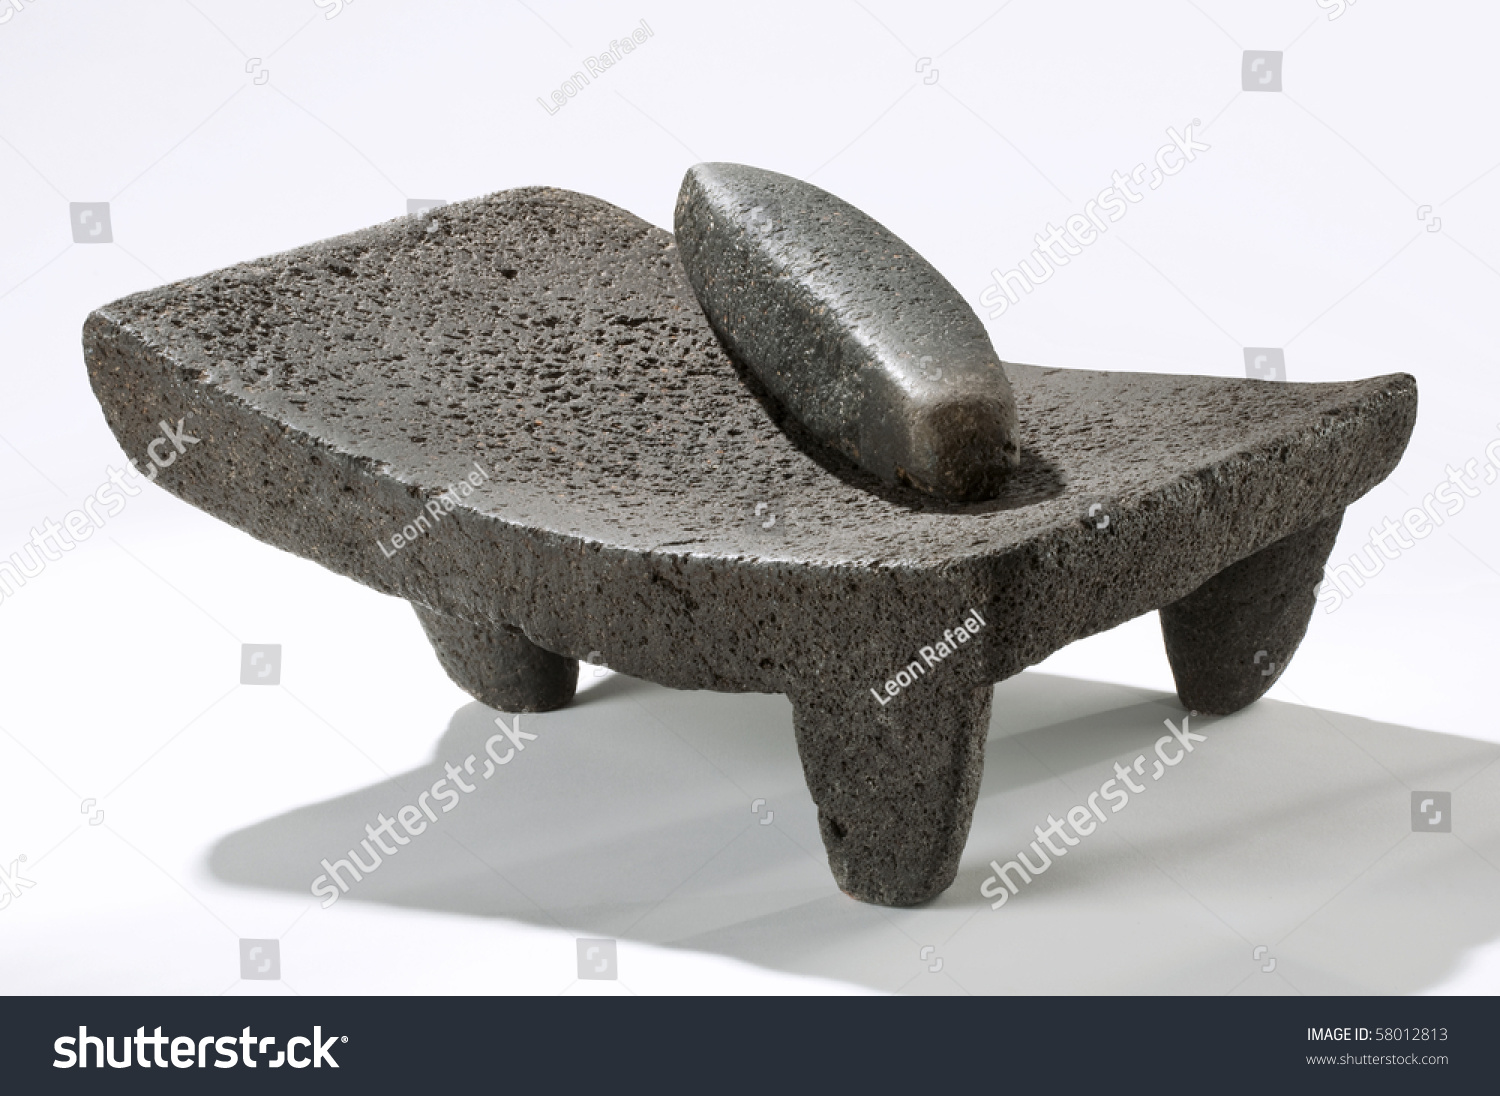 stock-photo-metate-mexican-stone-utensil-used-for-grinding-corn-sauces-and-pastes-by-hand-58012813.jpg